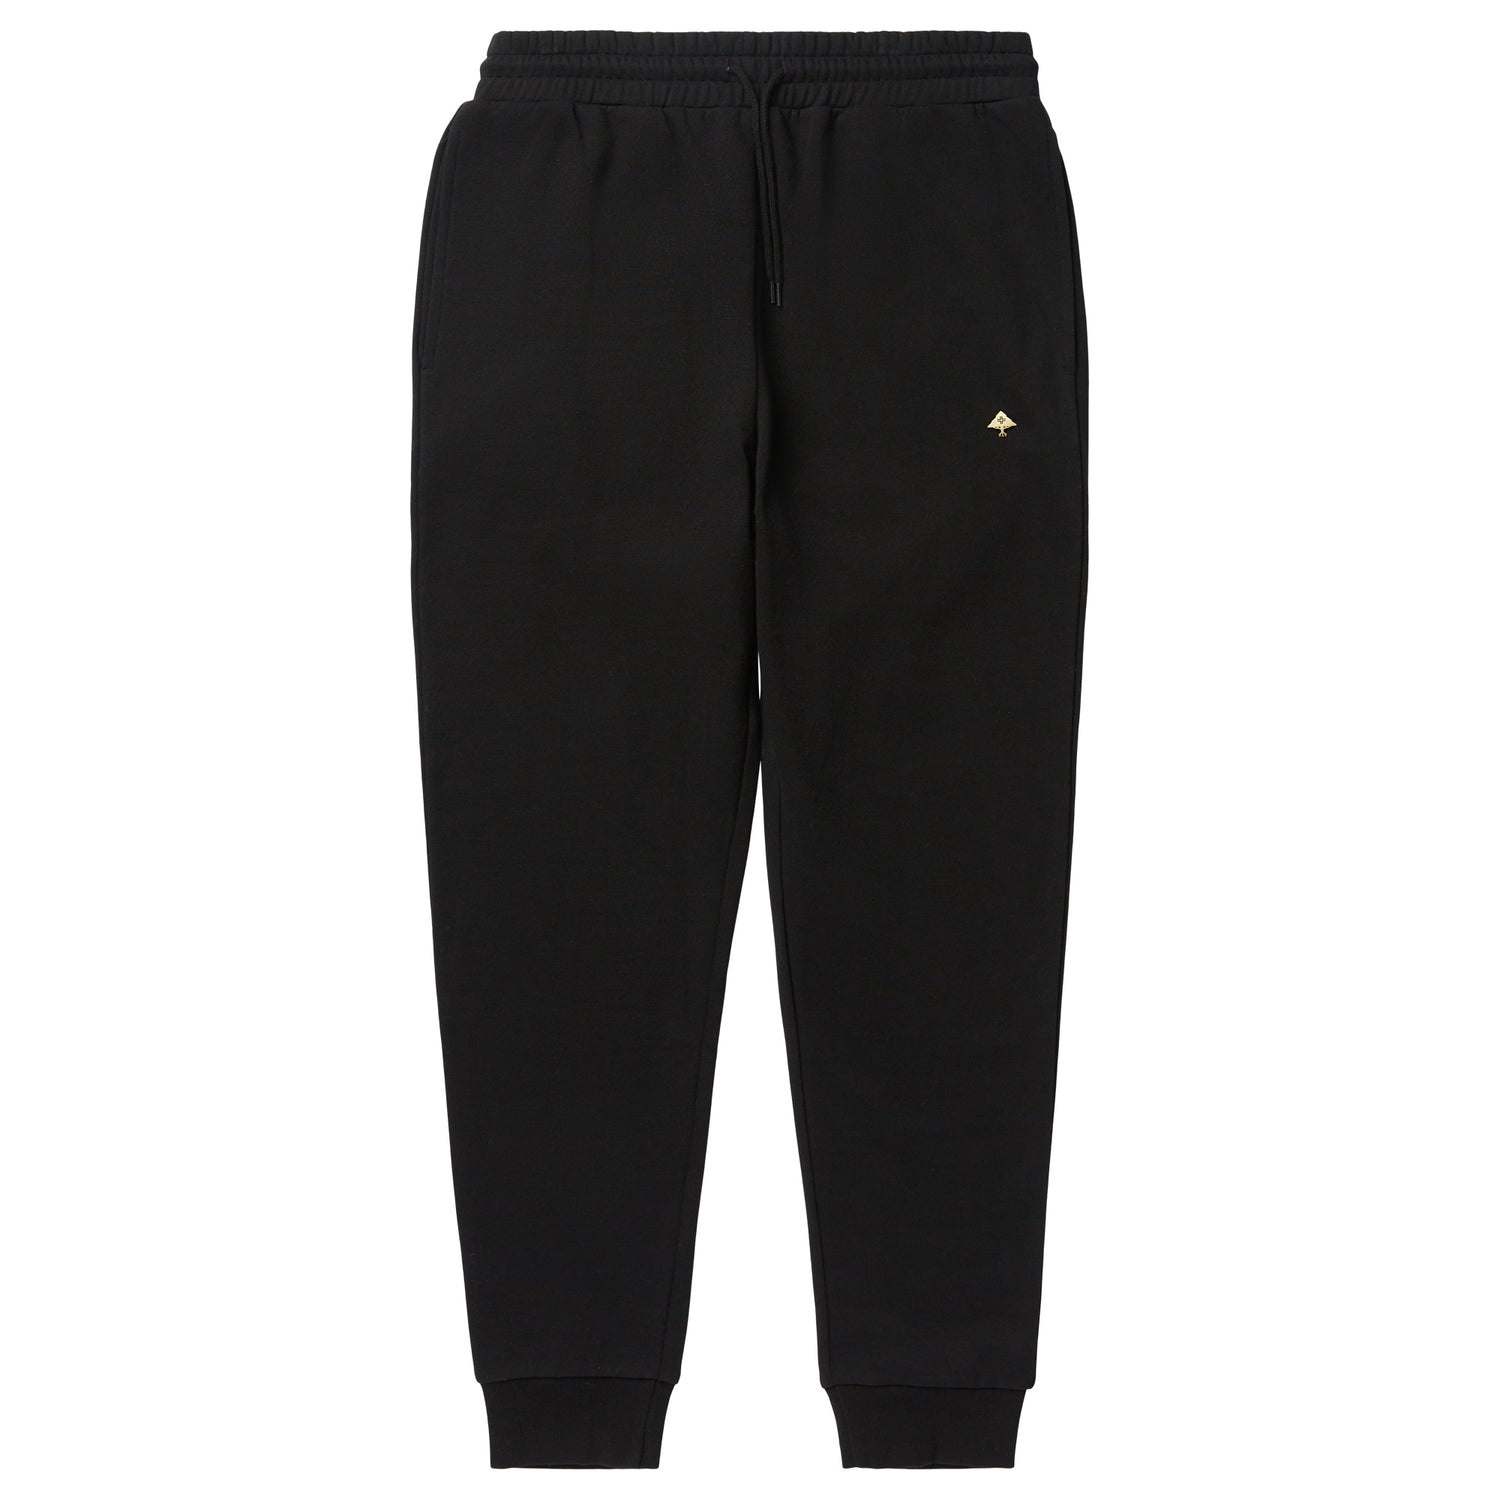 NOTHING BUT GOLD JOGGER SWEATPANTS - BLACK